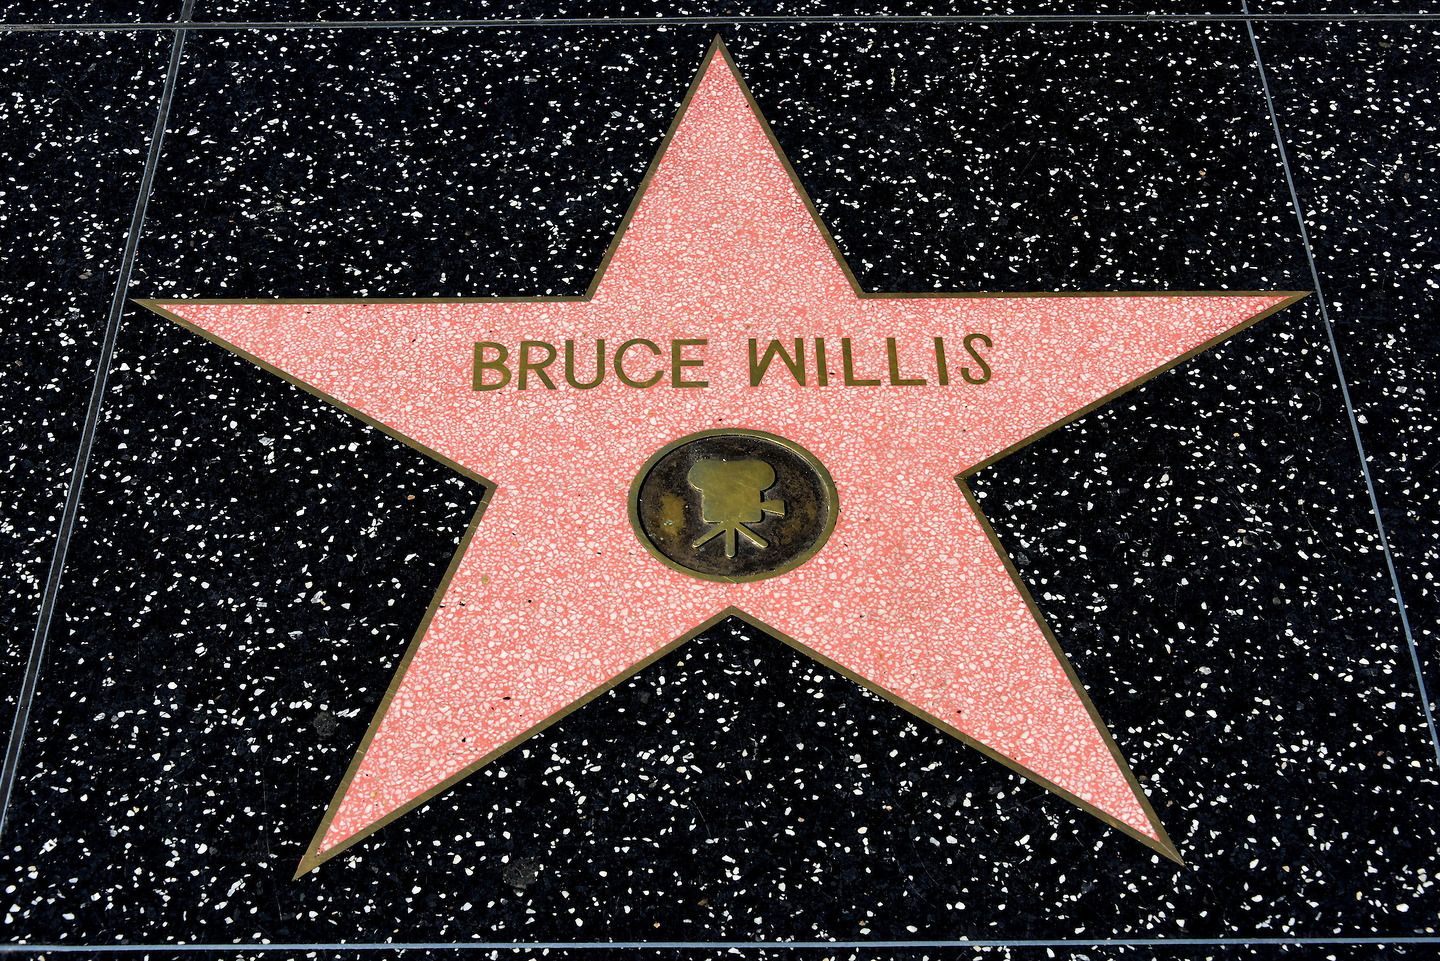 Bruce Willis on the Hollywood Walk of Fame